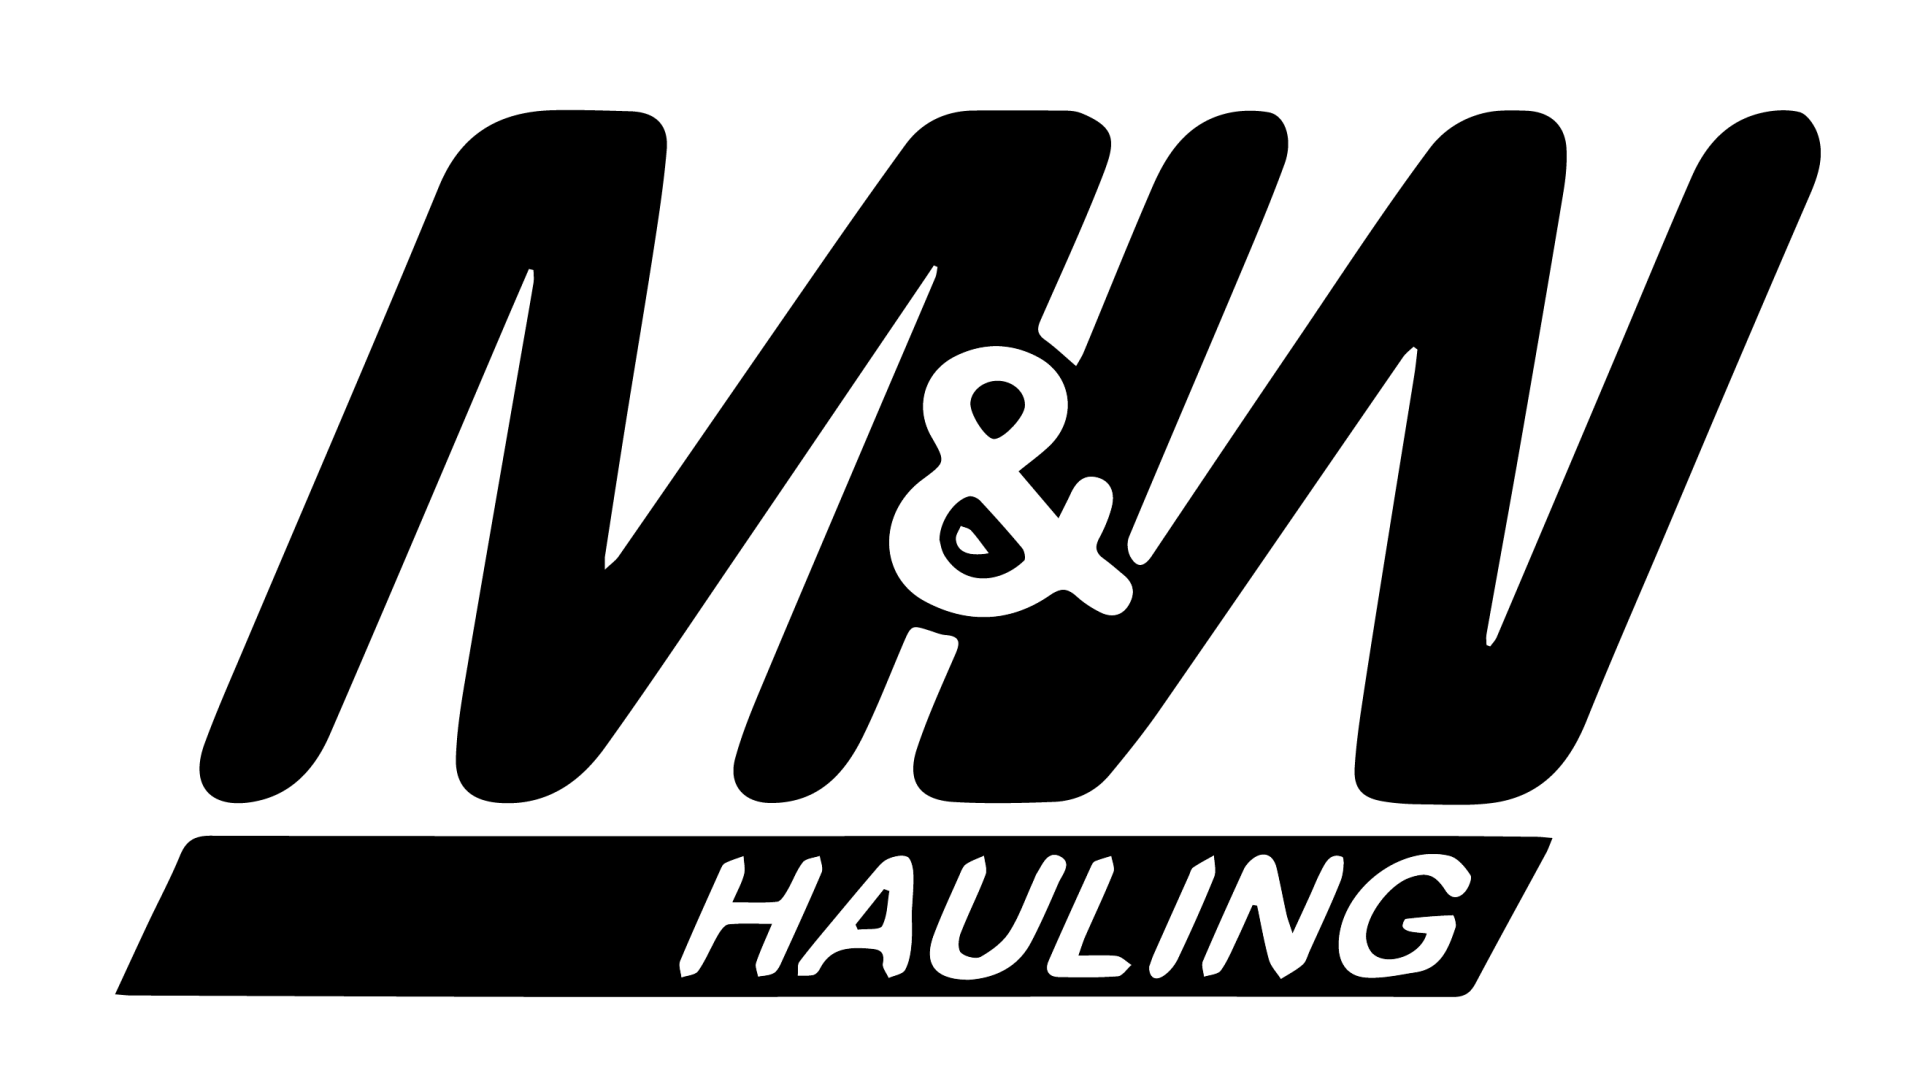 M&W Hauling Serving Clients for Over 30 Years!